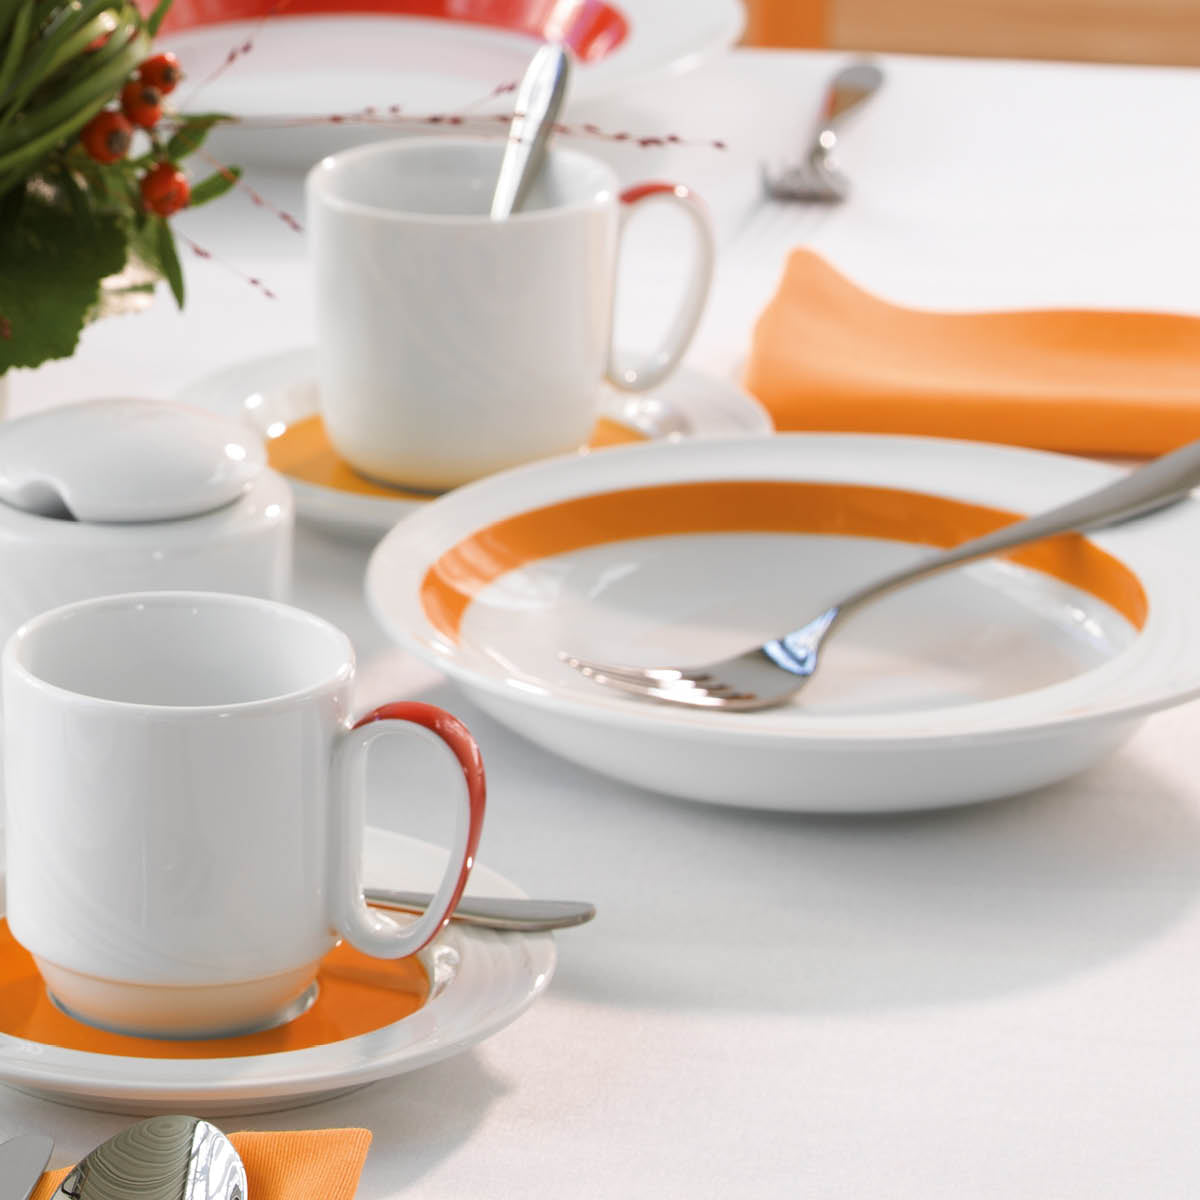 SH9182740/62991 Donna Senior Decor Stackable Soup Cup with 2 Handles with Orange Band 108x66mm / 480ml Tomkin Australia Hospitality Supplies